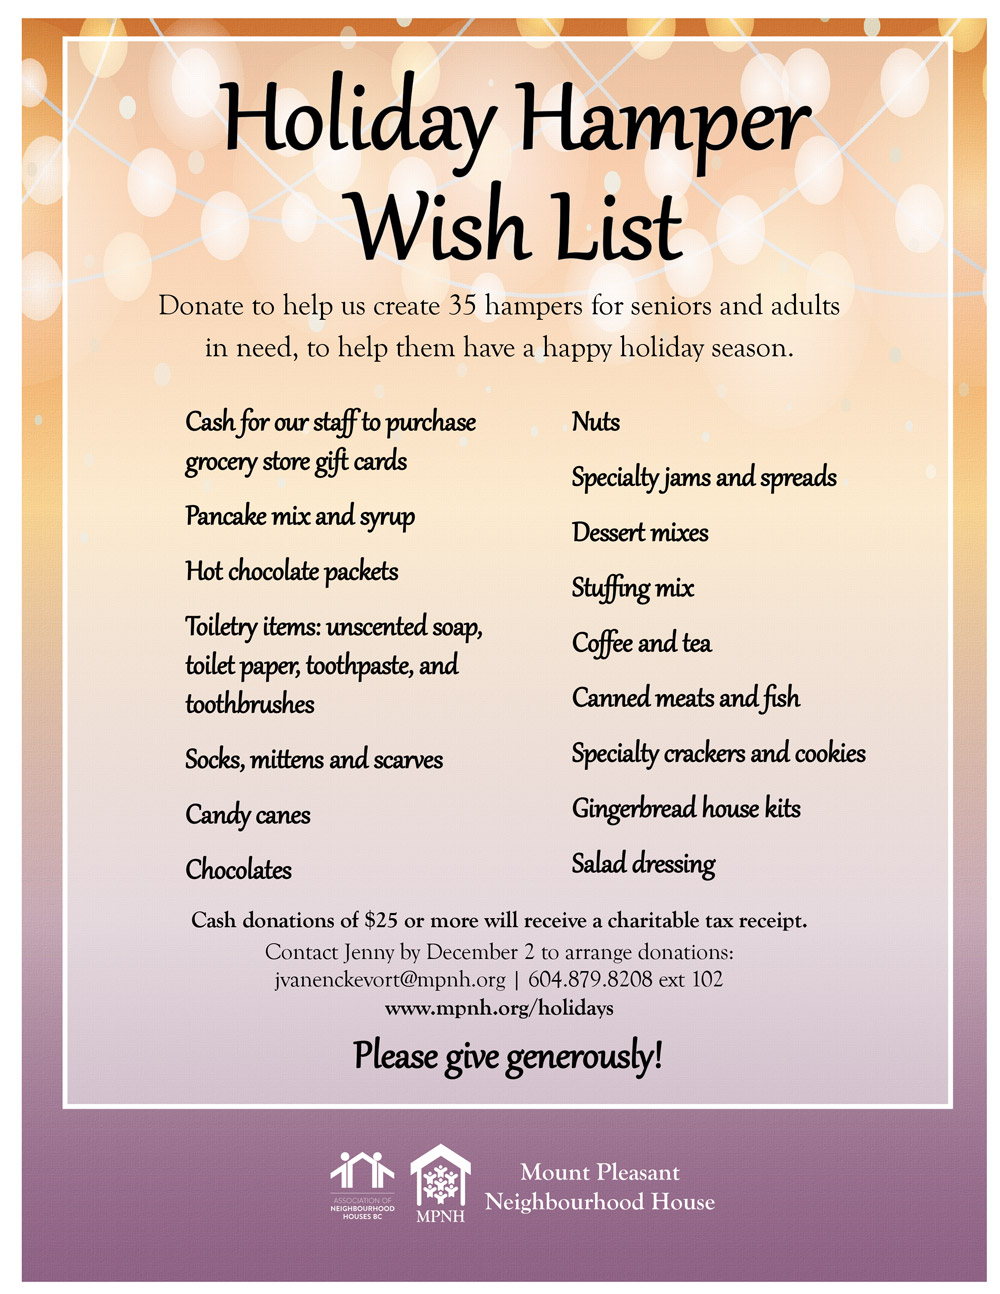 An image of the poster with a list of hamper wish items, featuring a colourful holiday background.